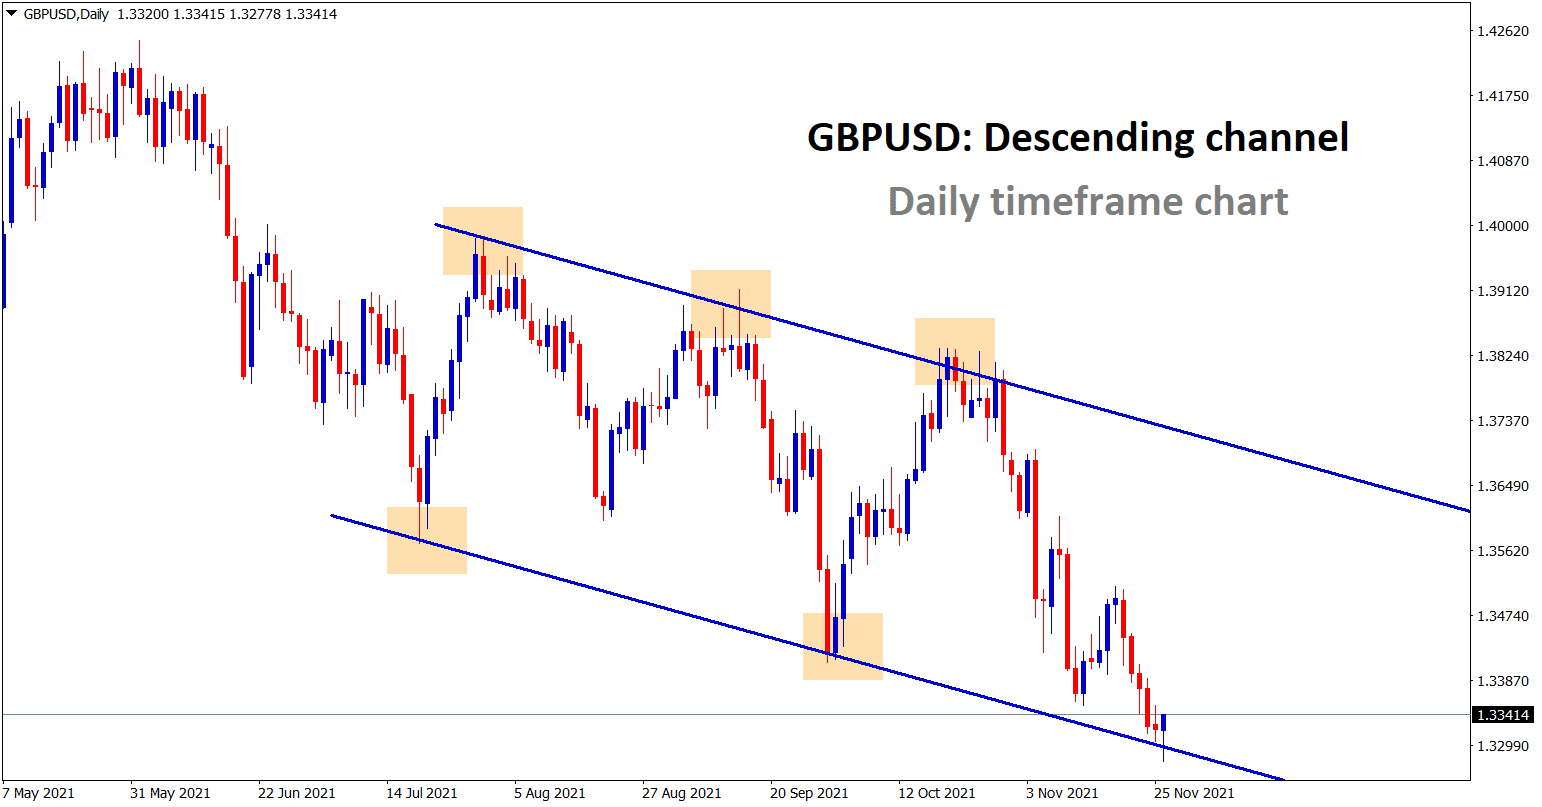 GBPUSD is standing at the lower low area of the descending channel in the daily timeframe